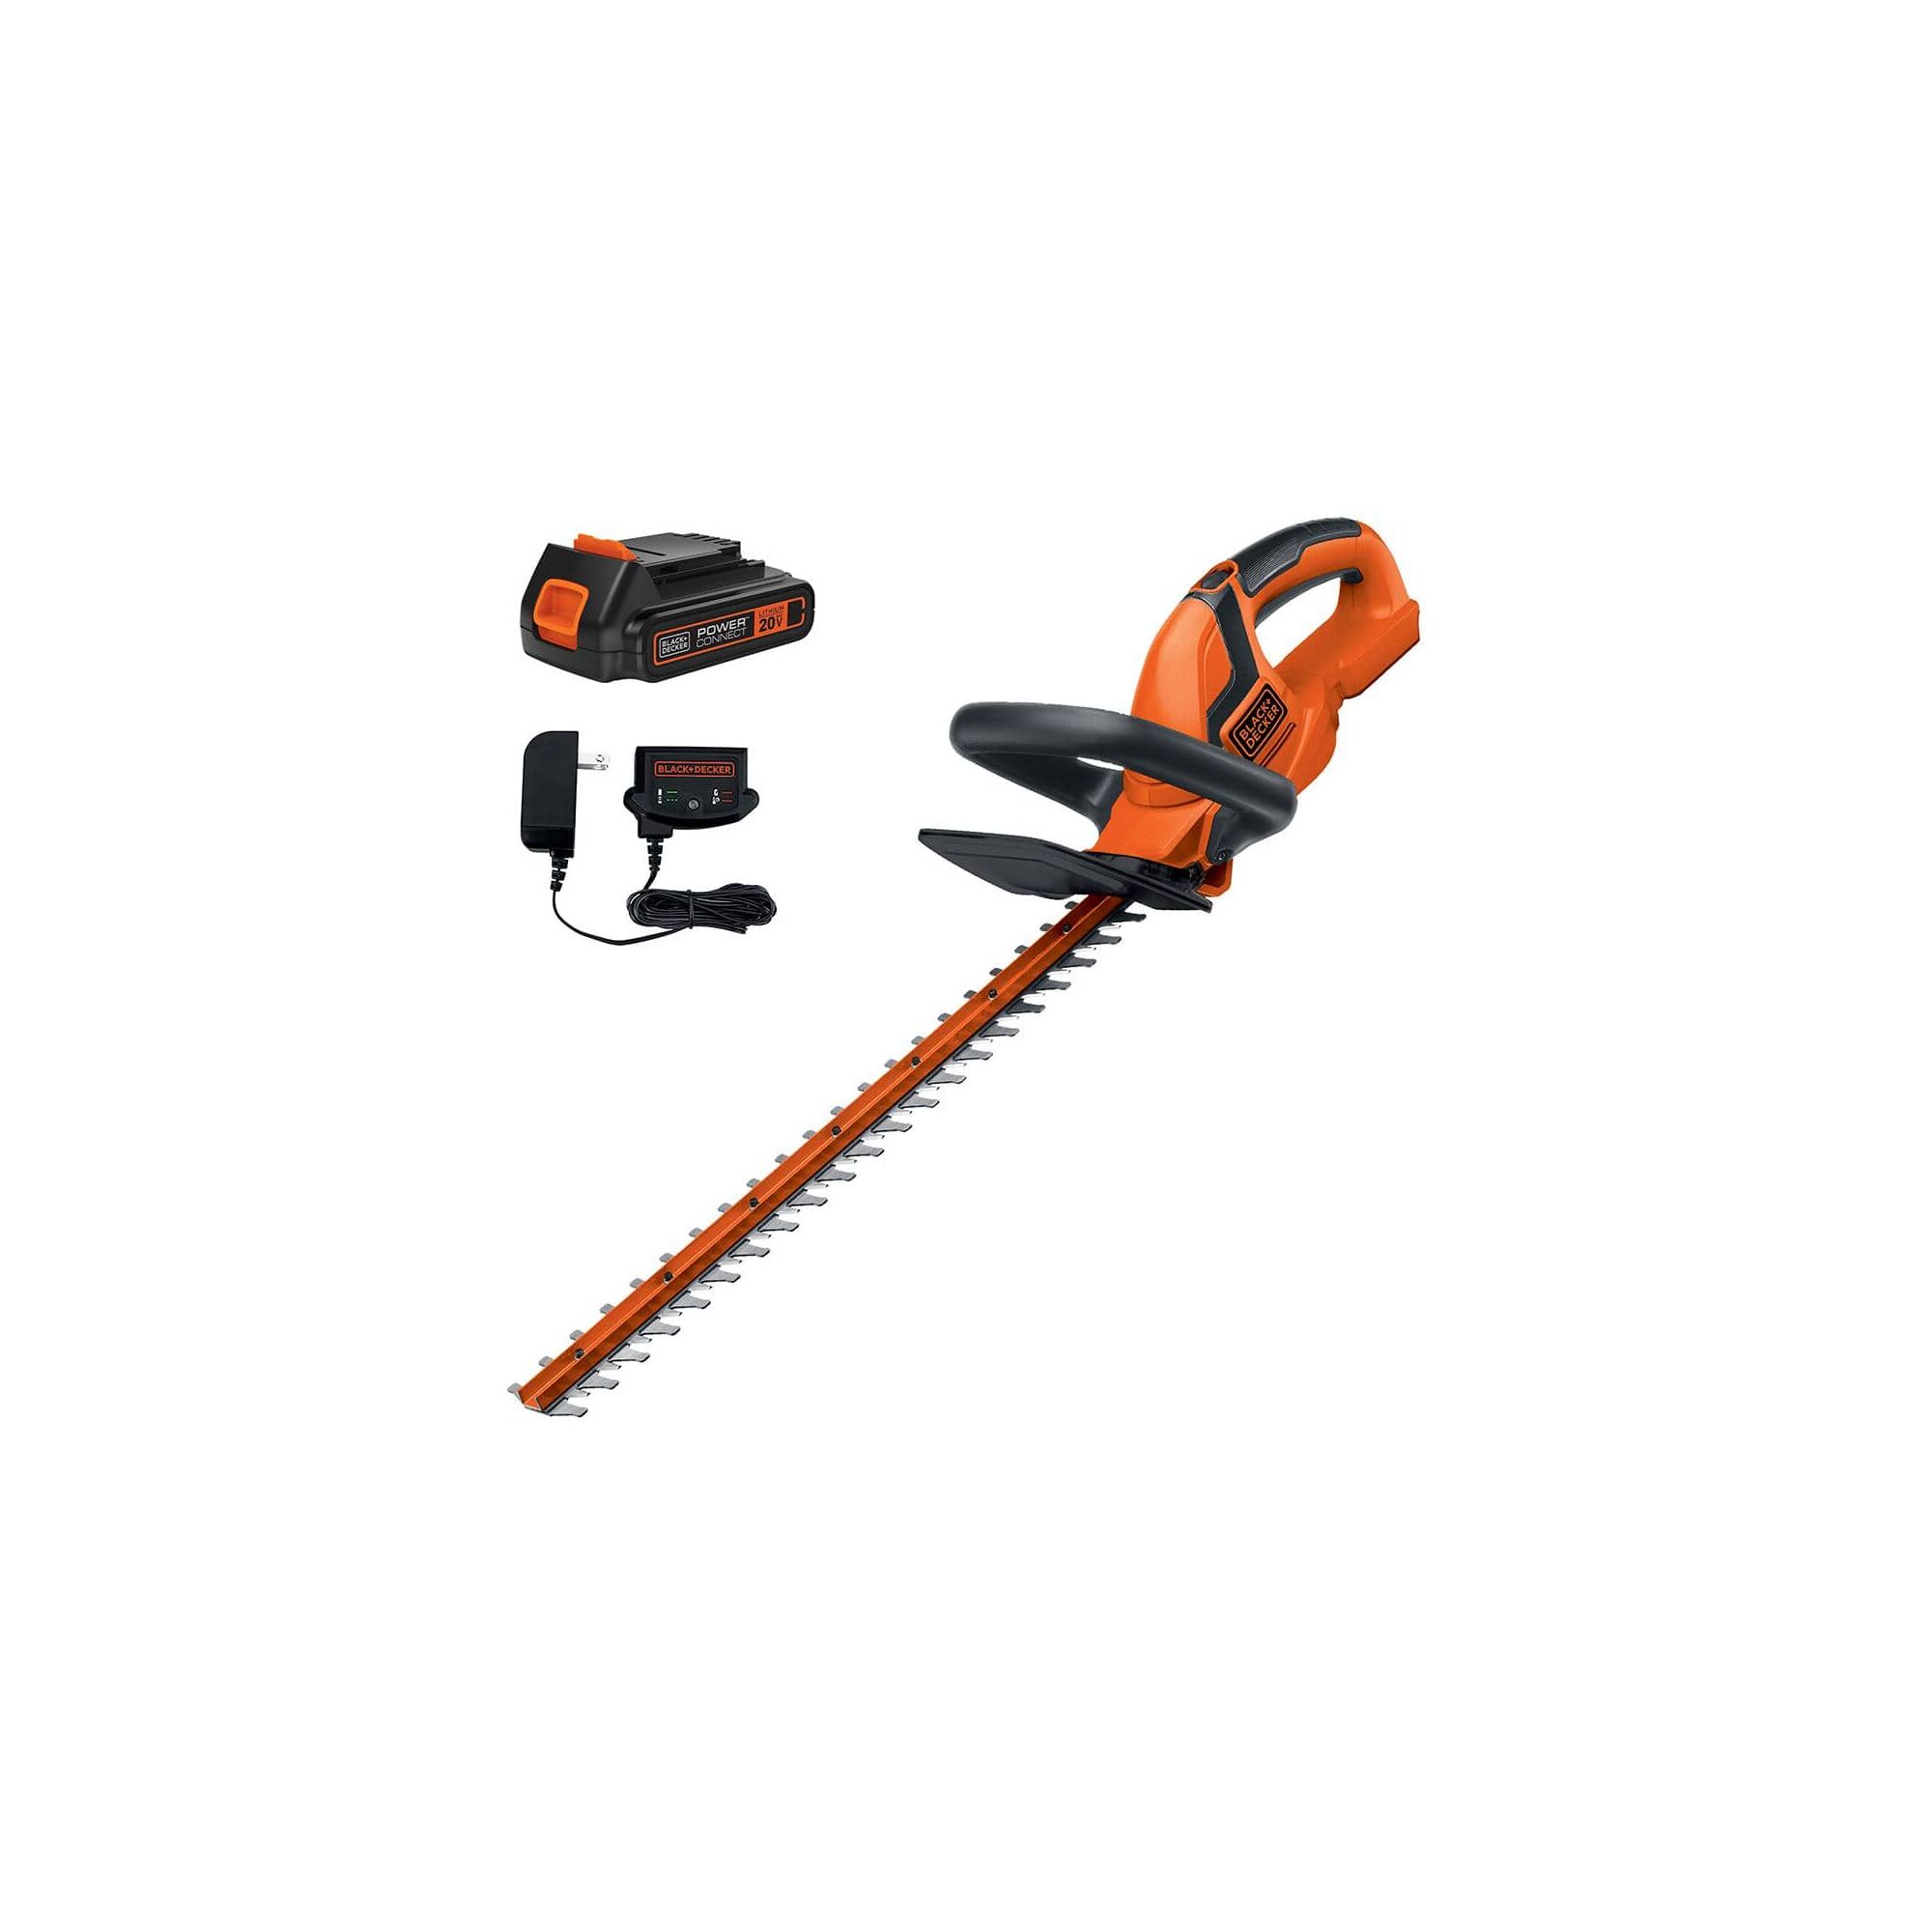 Kit components for the BLACK+DECKER hedge trimmer